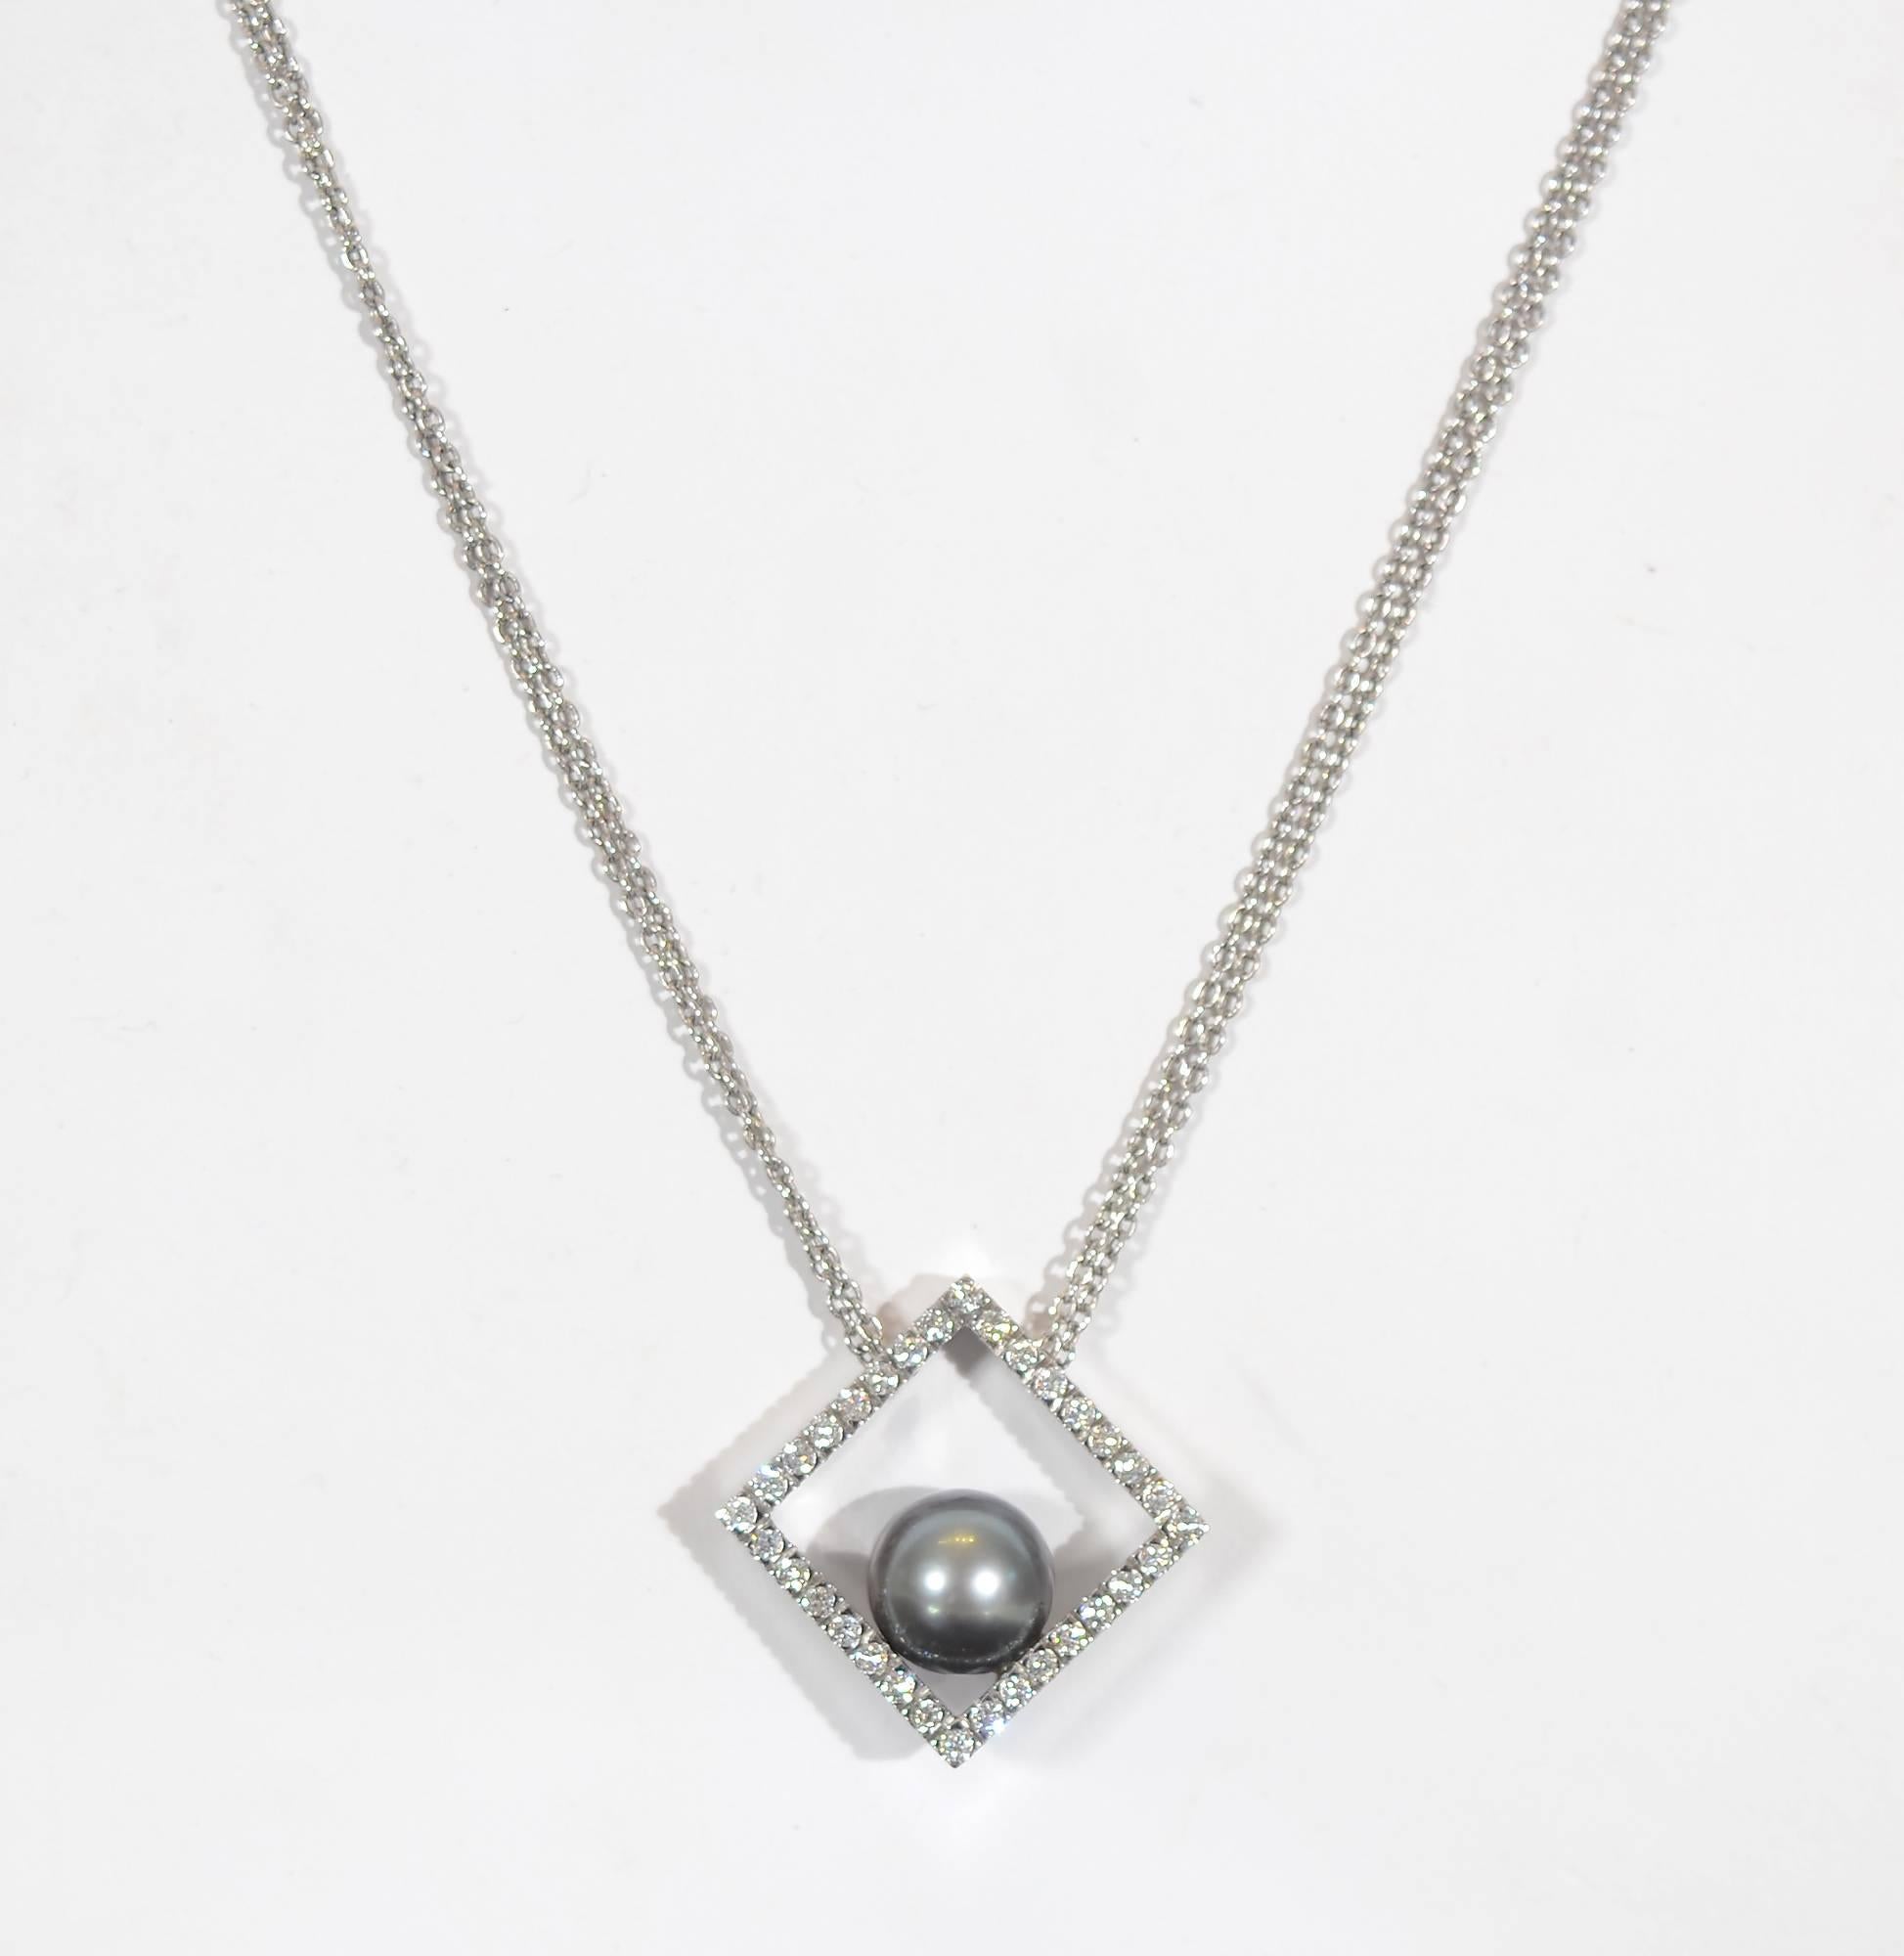 Lovely 18 karat white gold pendant with diamonds by Italian jeweler, Damiani. In a corner of the square pendant is a 9 mm black pearl. The square measures 3/4